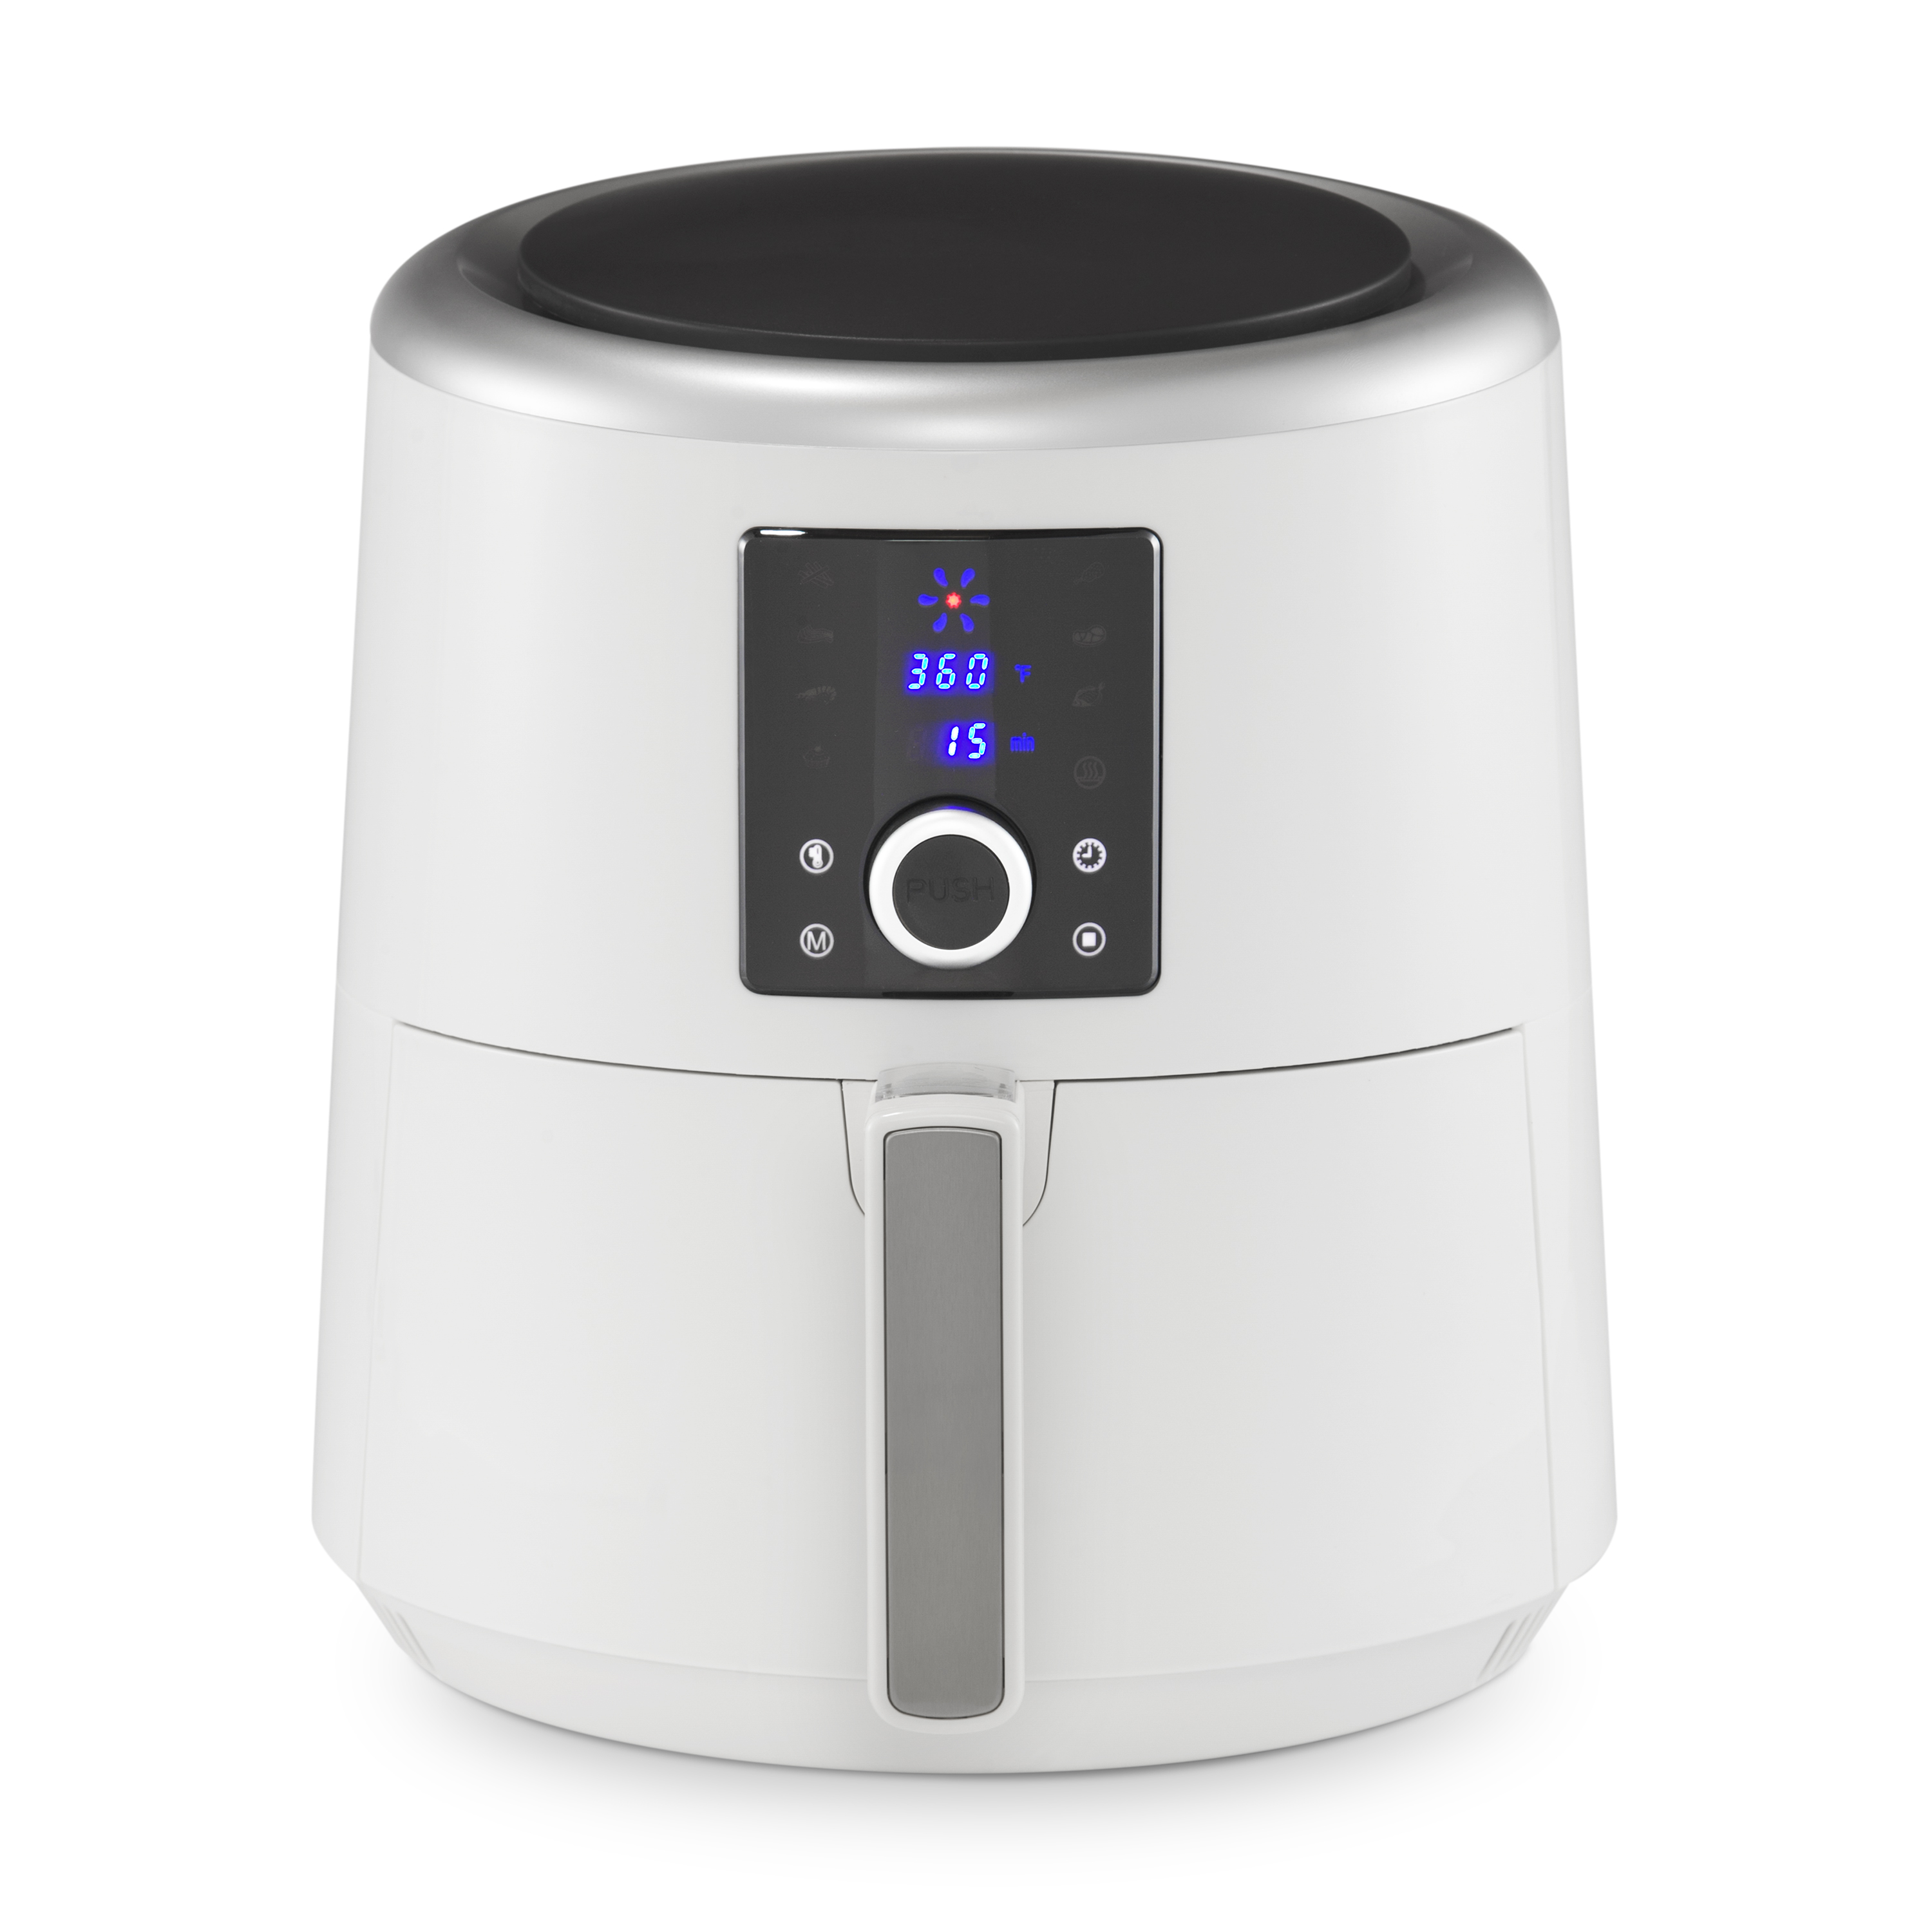 La Gourmet 6-Qt. Digital Air Fryer and Convection Oven Only $65.65